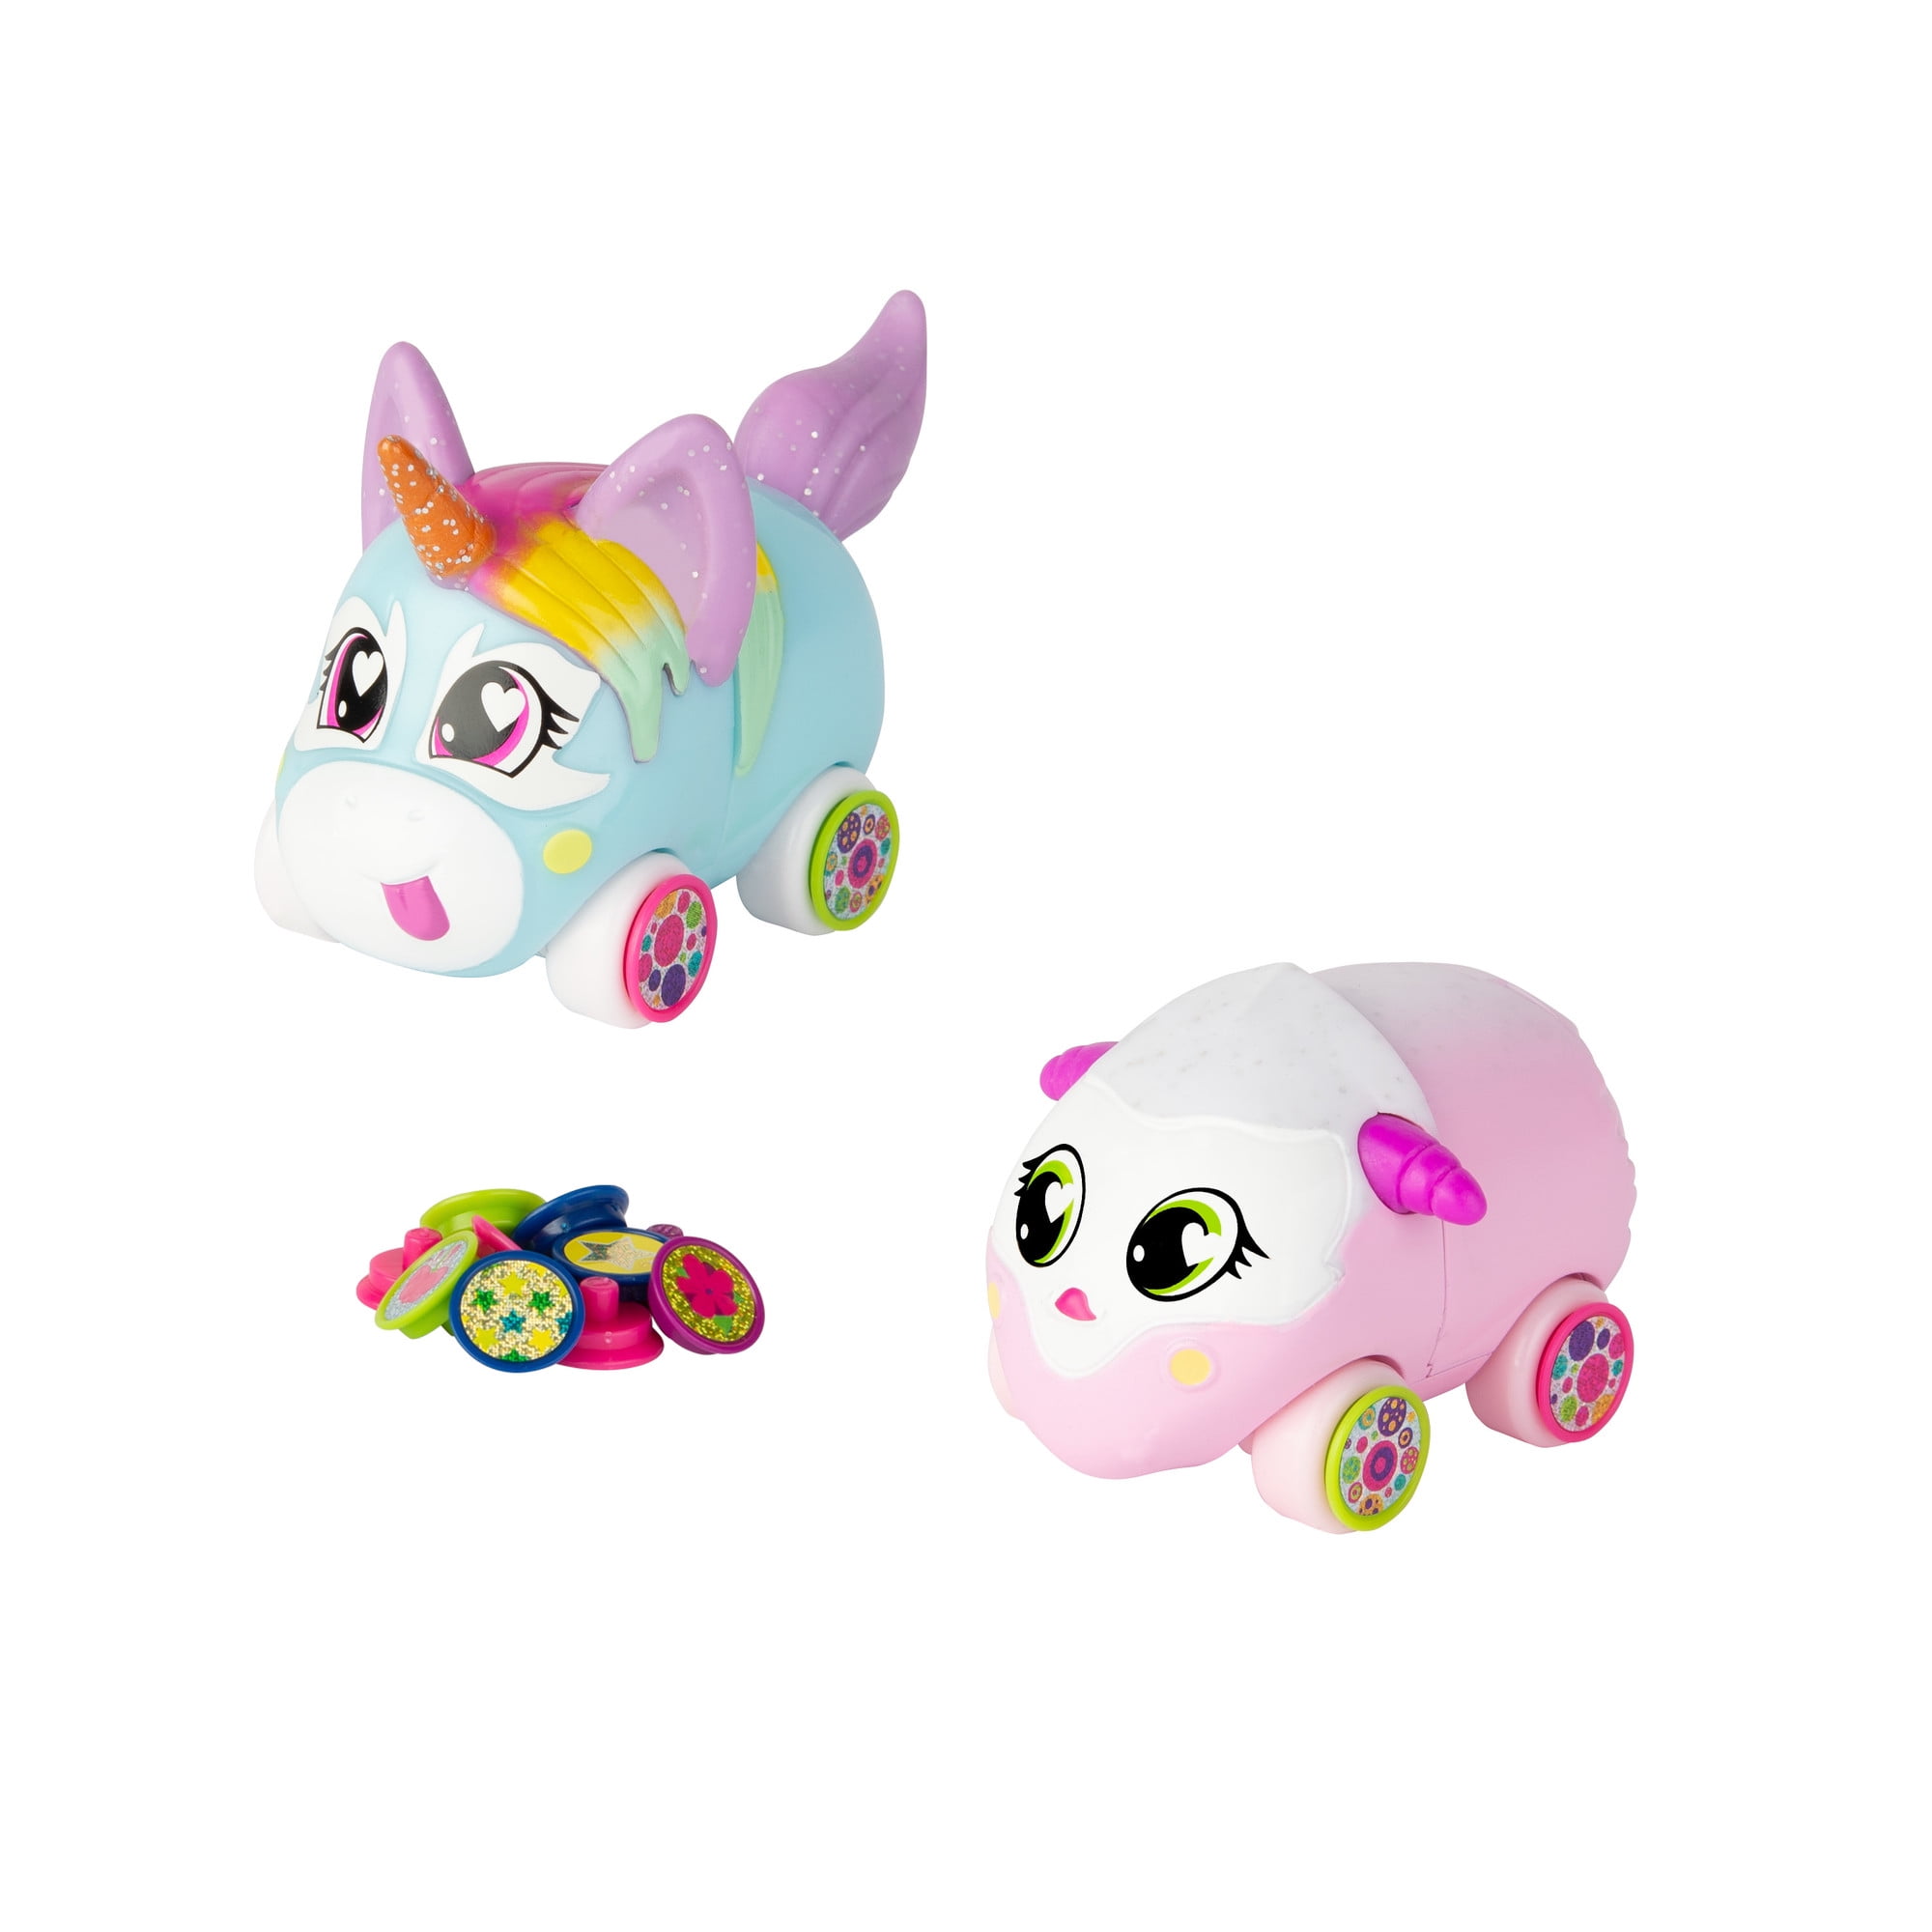 Ritzy Rollerz Cute Collectable Animal Girls' Toy Cars with Surprise Charms n 4 